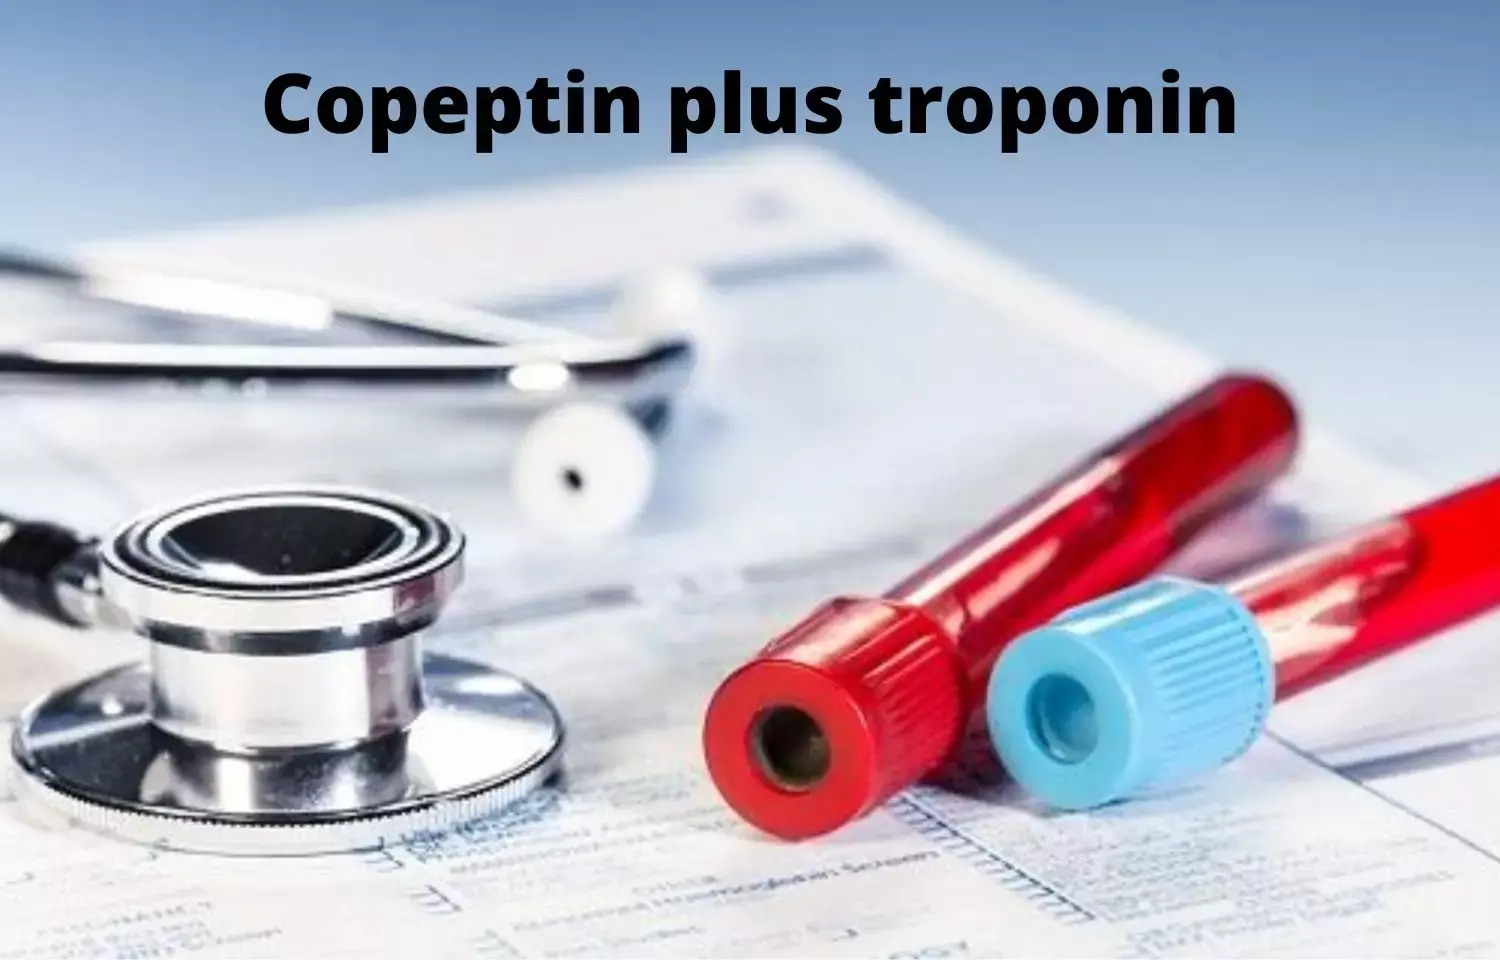 Copeptin plus troponin combo, accurate in ruling out acute myocardial infarction: Study